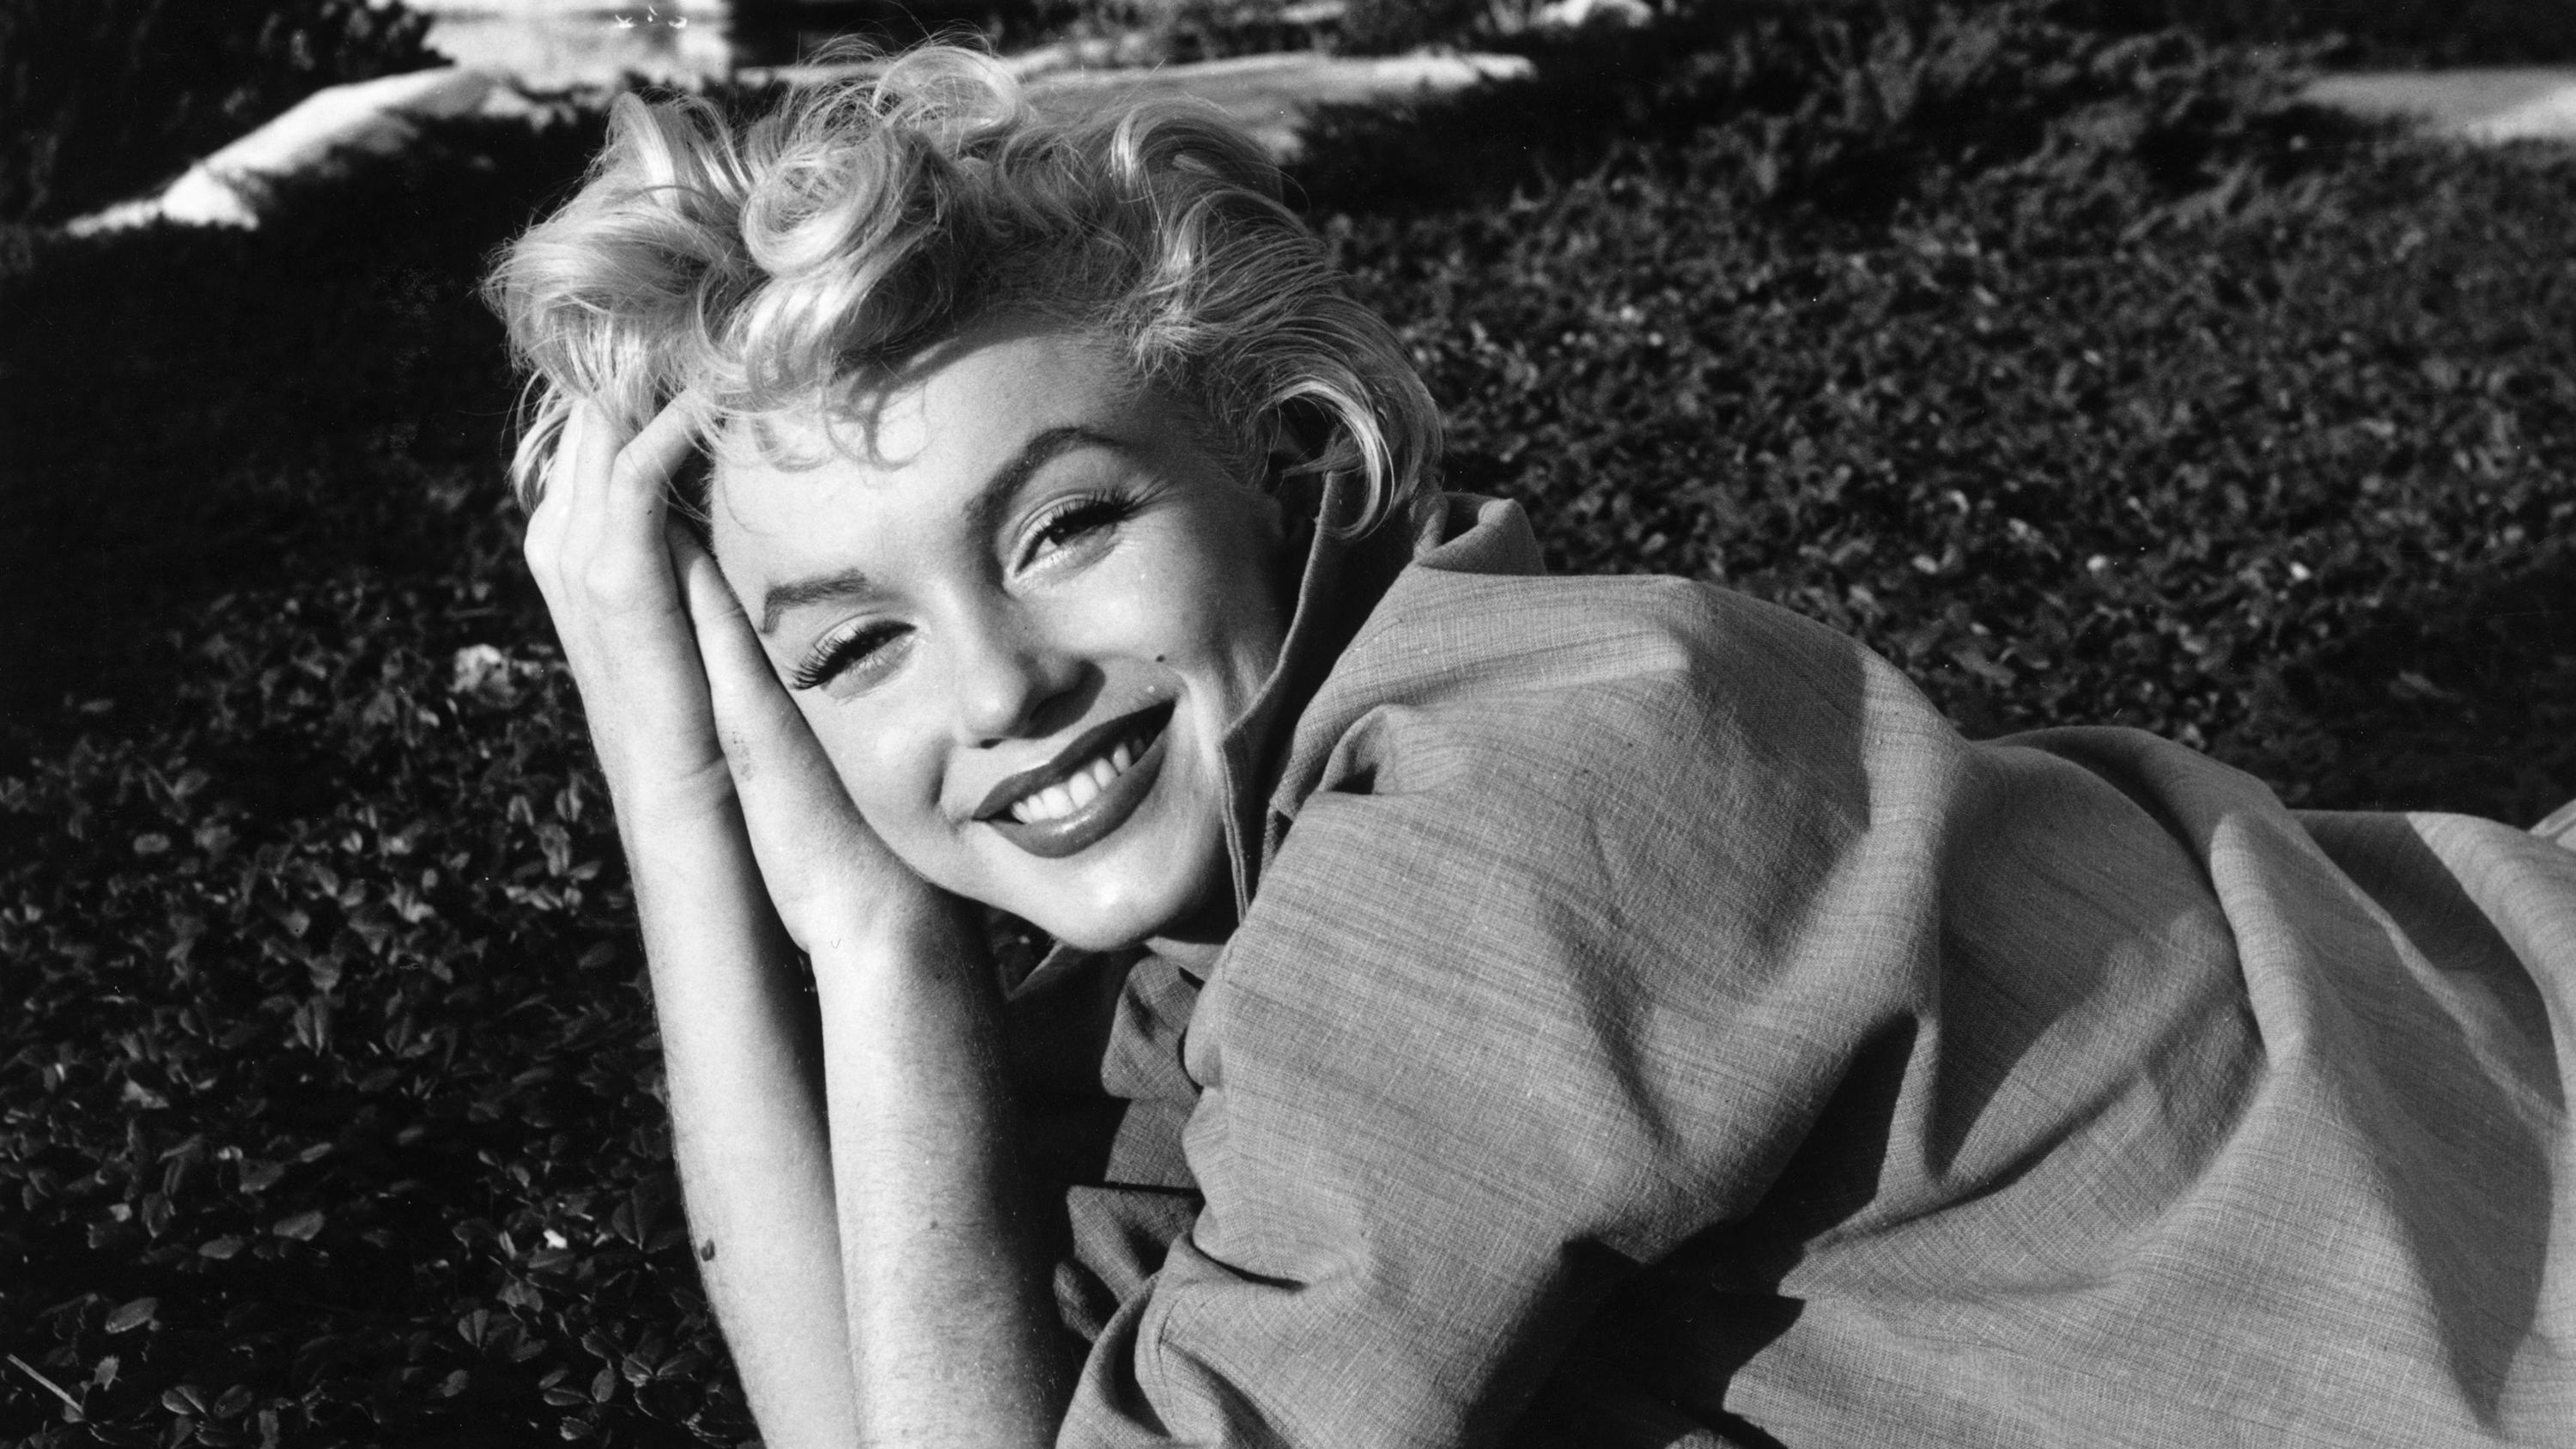 Marilyn Monroe's life in pictures